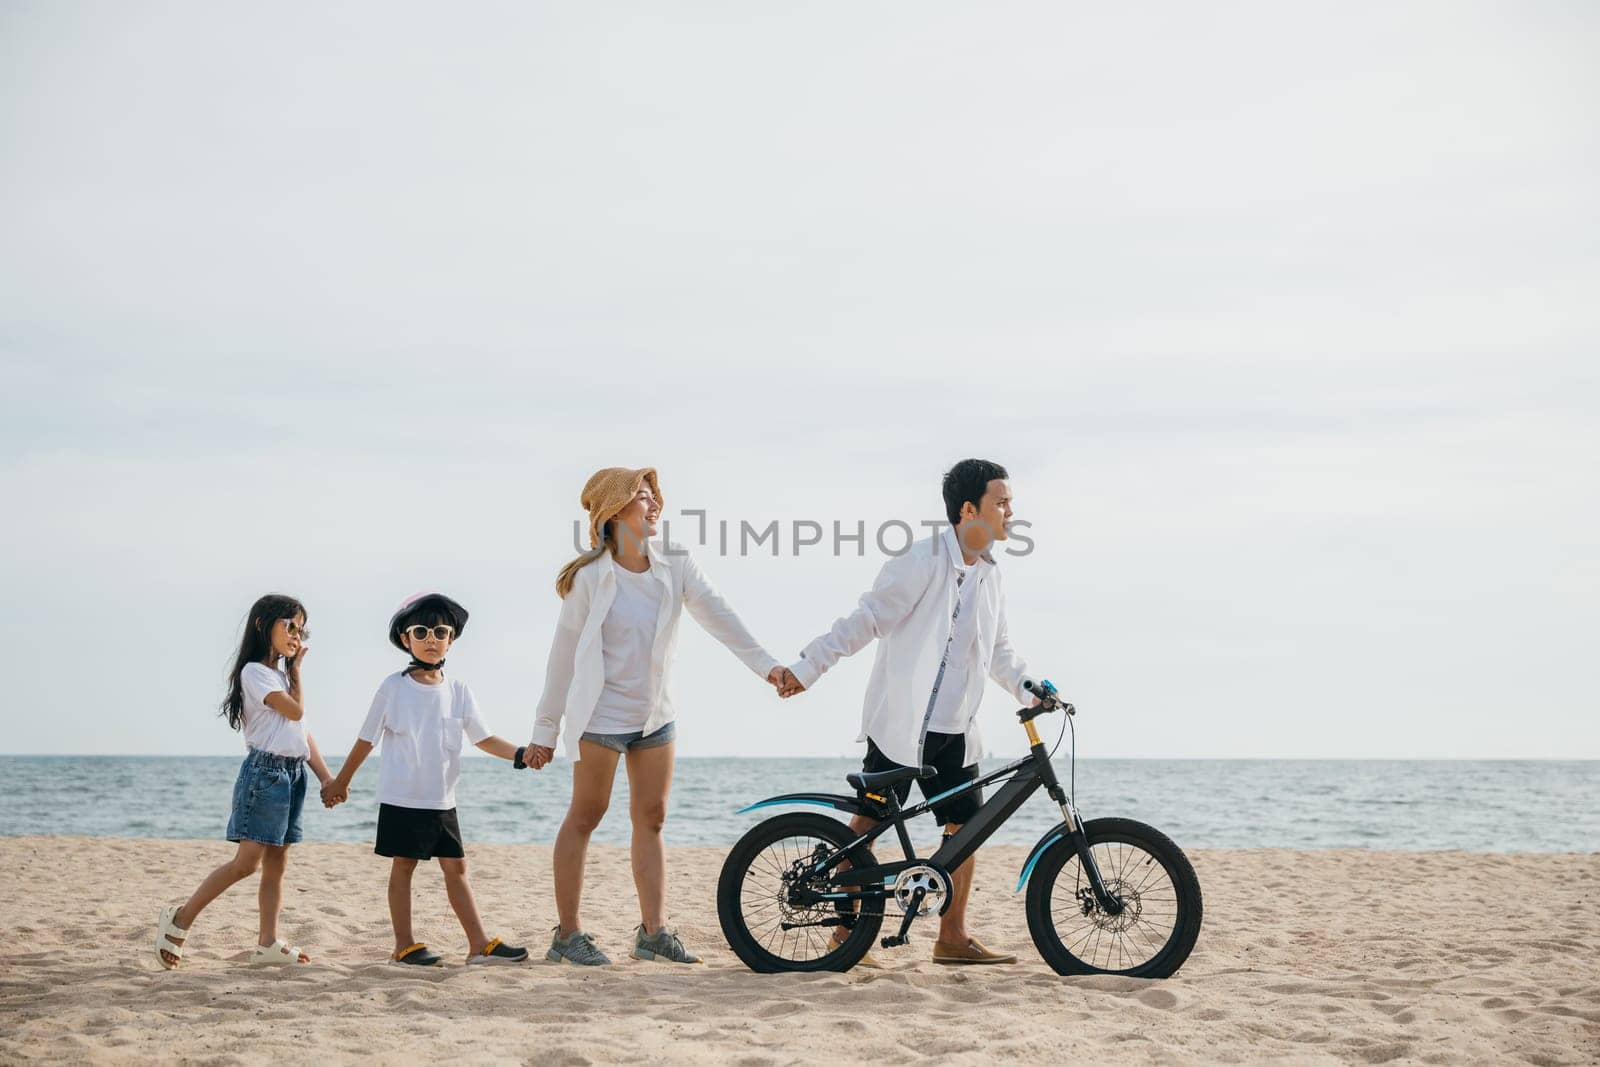 A family walk on the sandy beach parents pushing bicycles full of happiness joy and the carefree spirit of a childhood day by the sea. Family on beach vacation by Sorapop